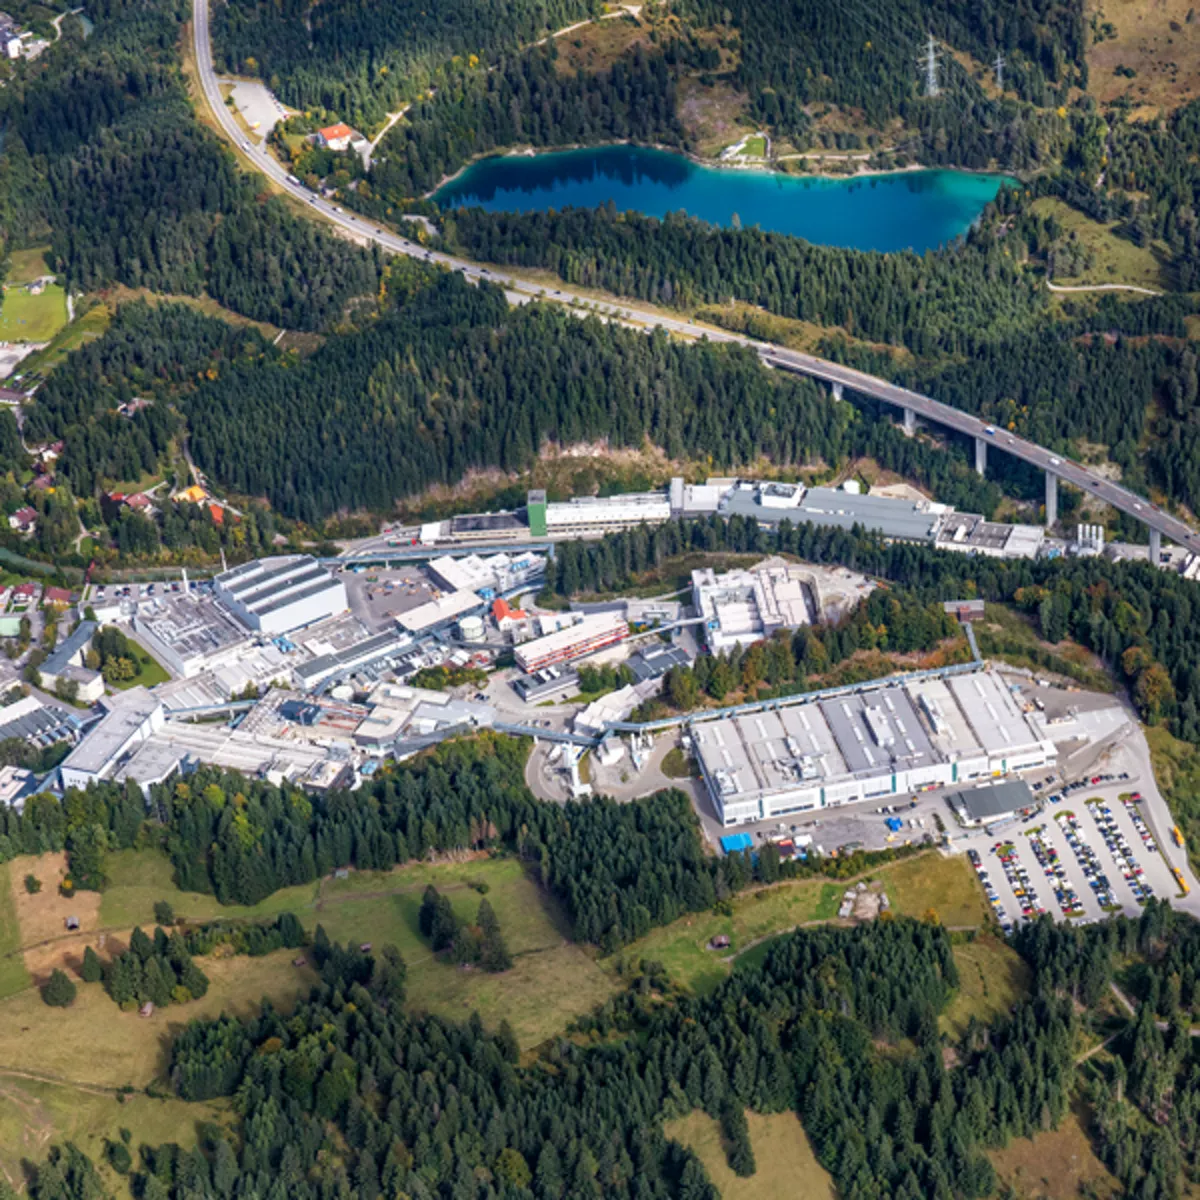 Apprenticeships at the Reutte site